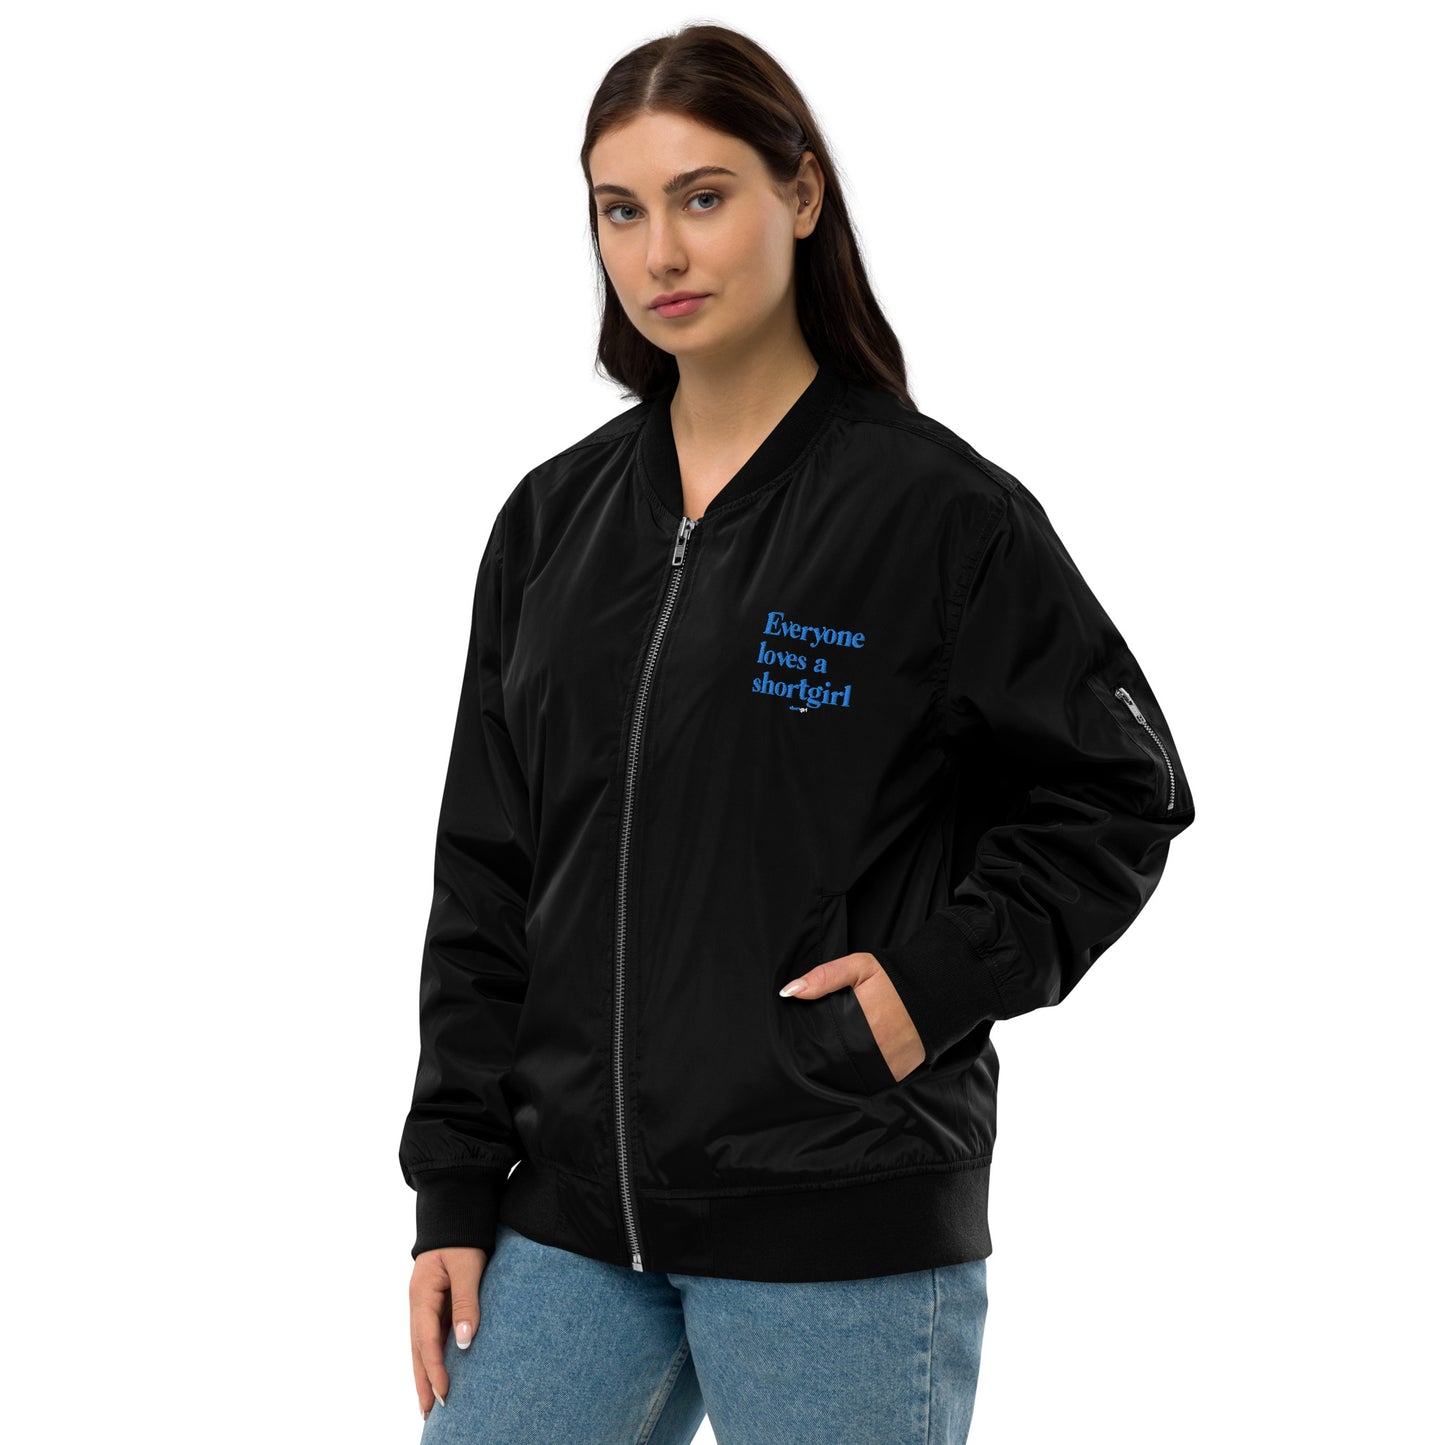 Premium recycled bomber jacket - Everyone loves a shortgirl